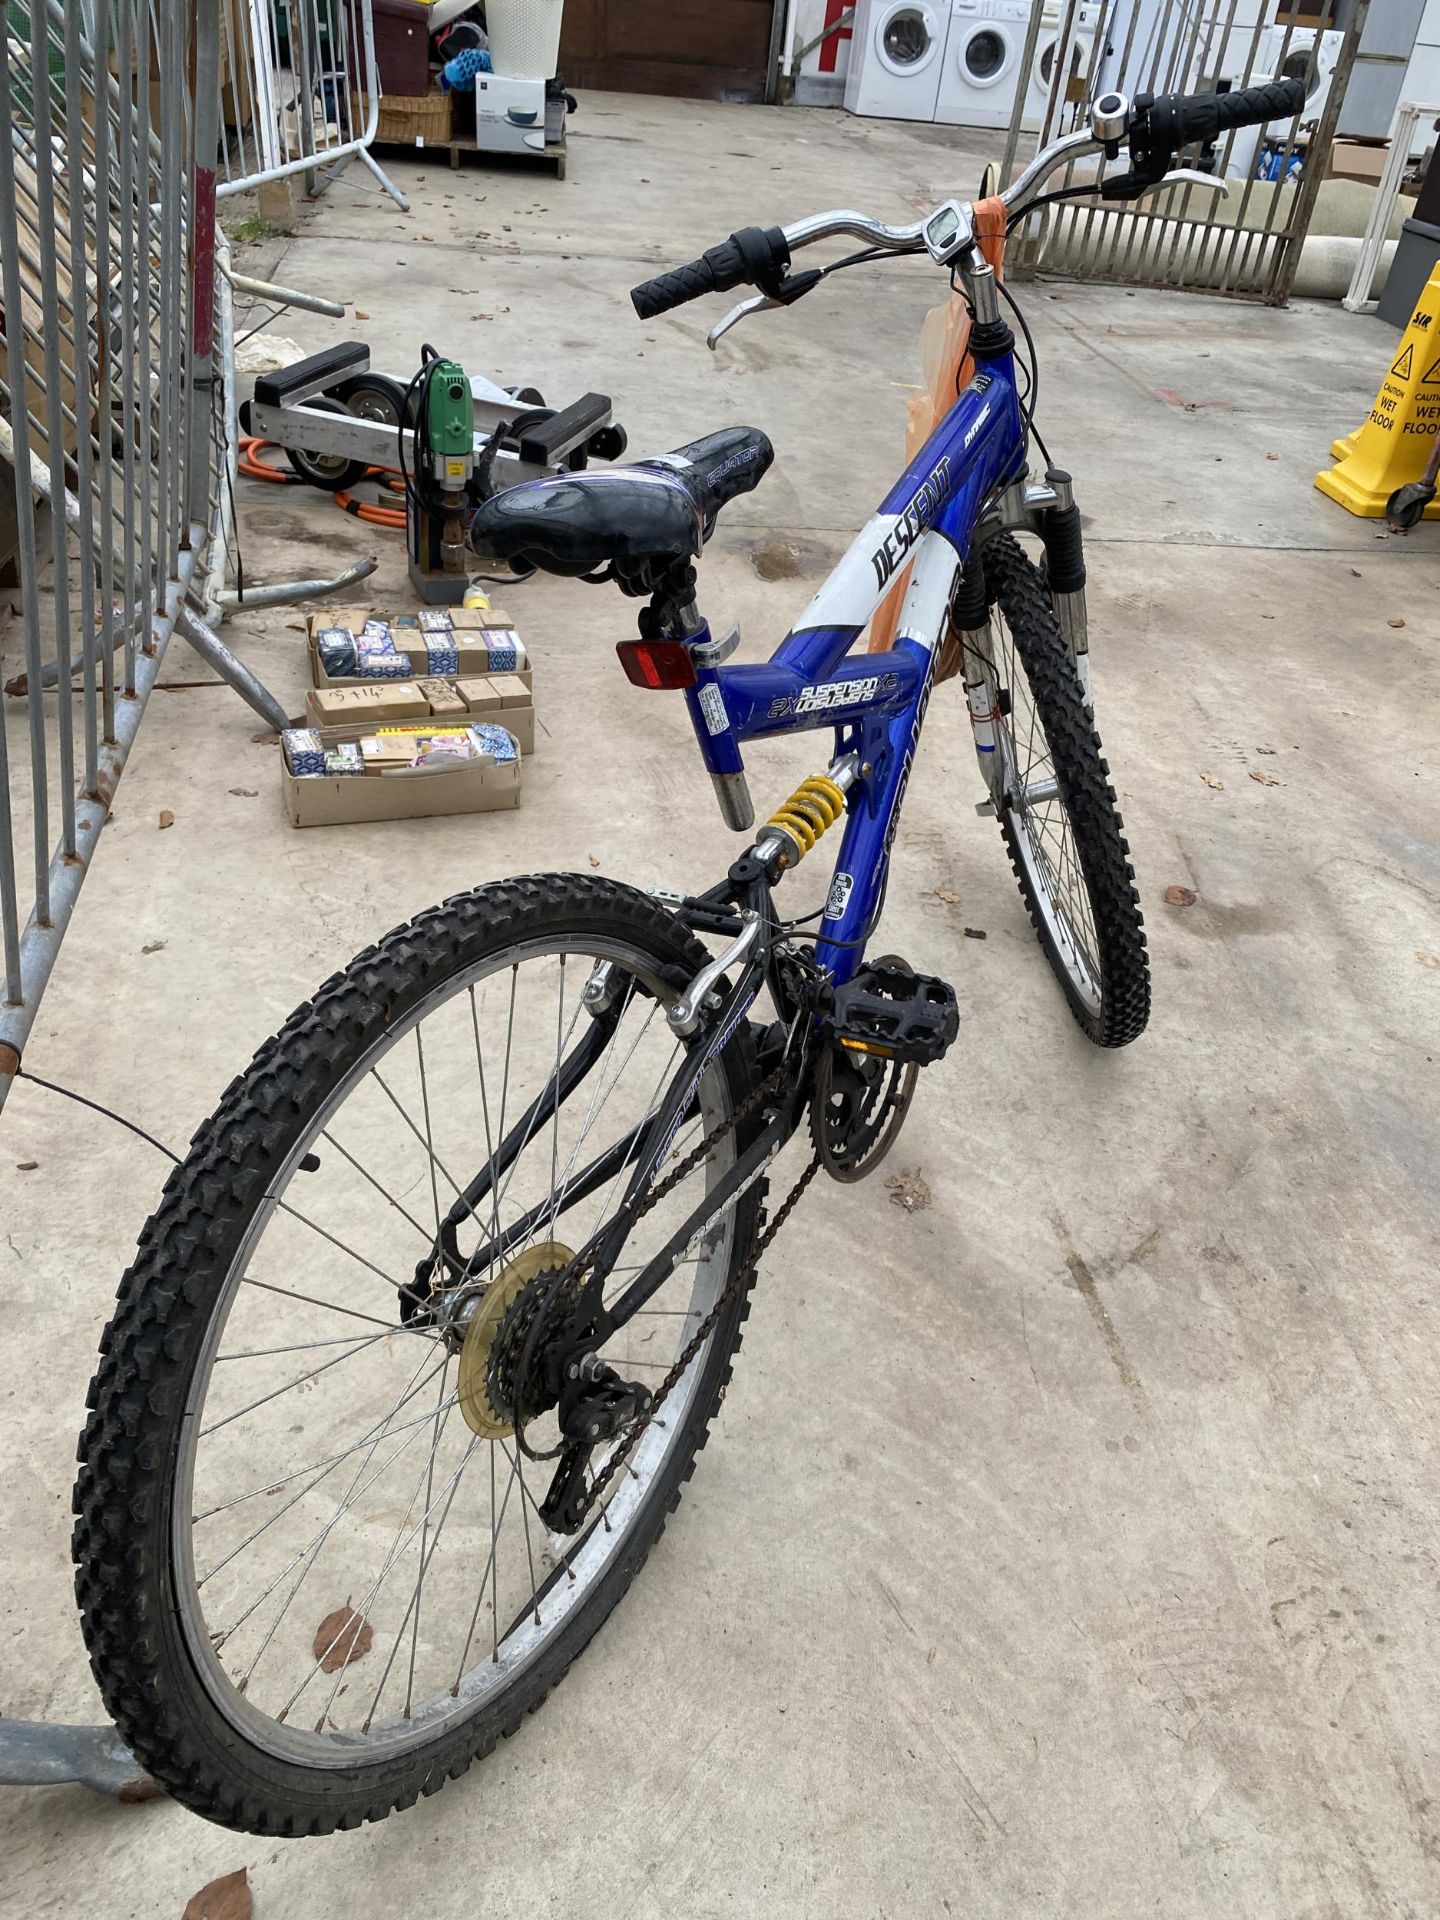 AN EQUATOR DESCENT MOUNTAIN BIKE WITH FRONT AND REAR SUSPENSION AND 18 SPEED SHIMANO GEAR SYSTEM - Image 2 of 4